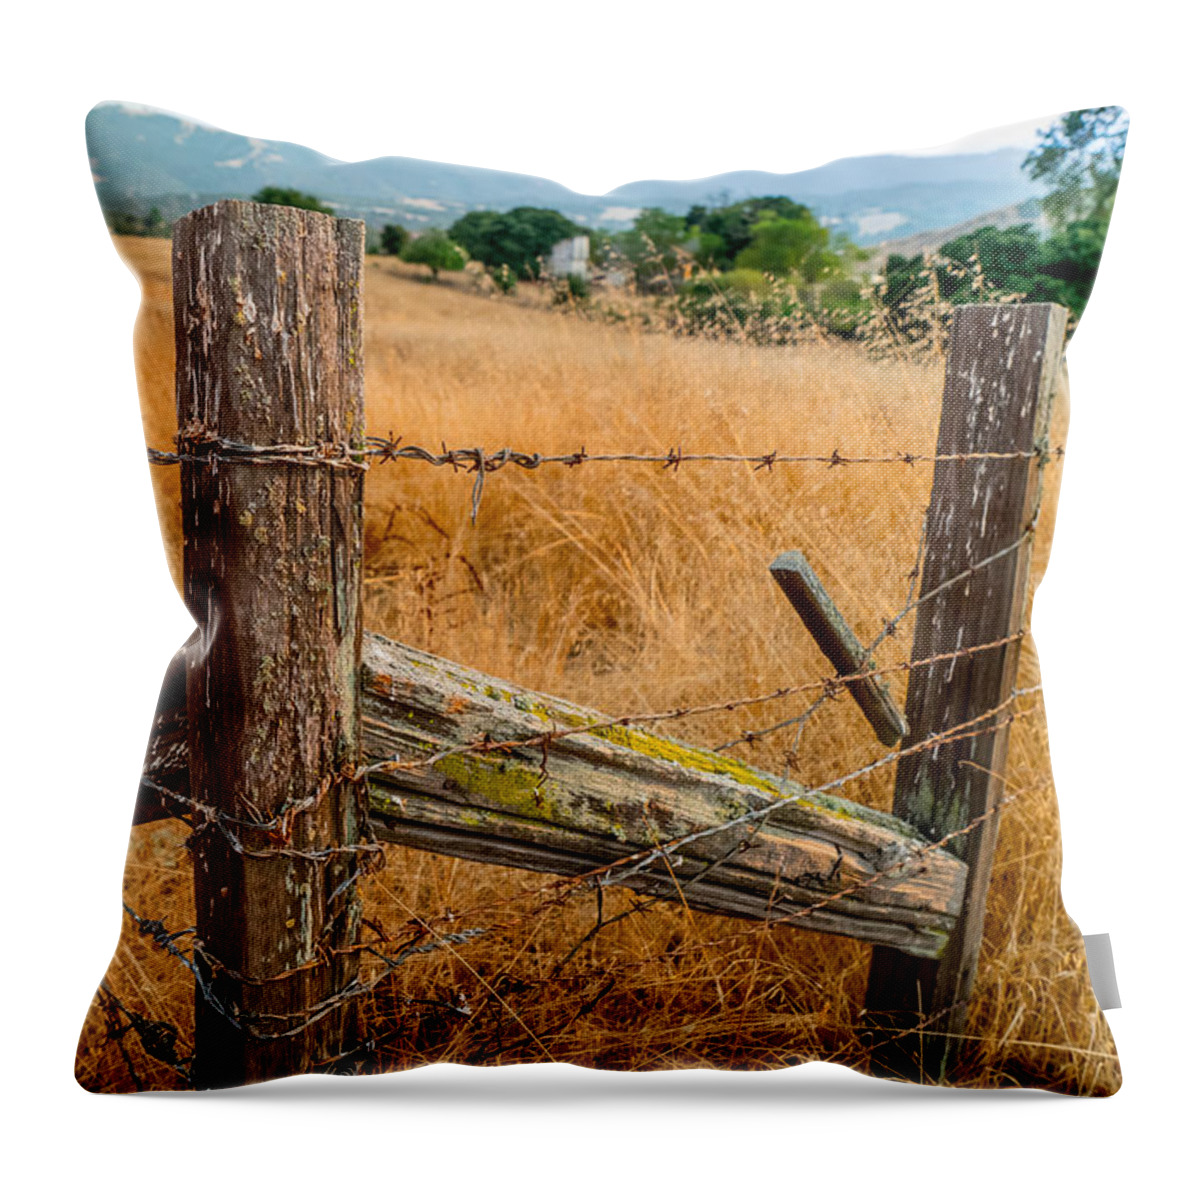 Ranch Throw Pillow featuring the photograph Fence Posts by Derek Dean